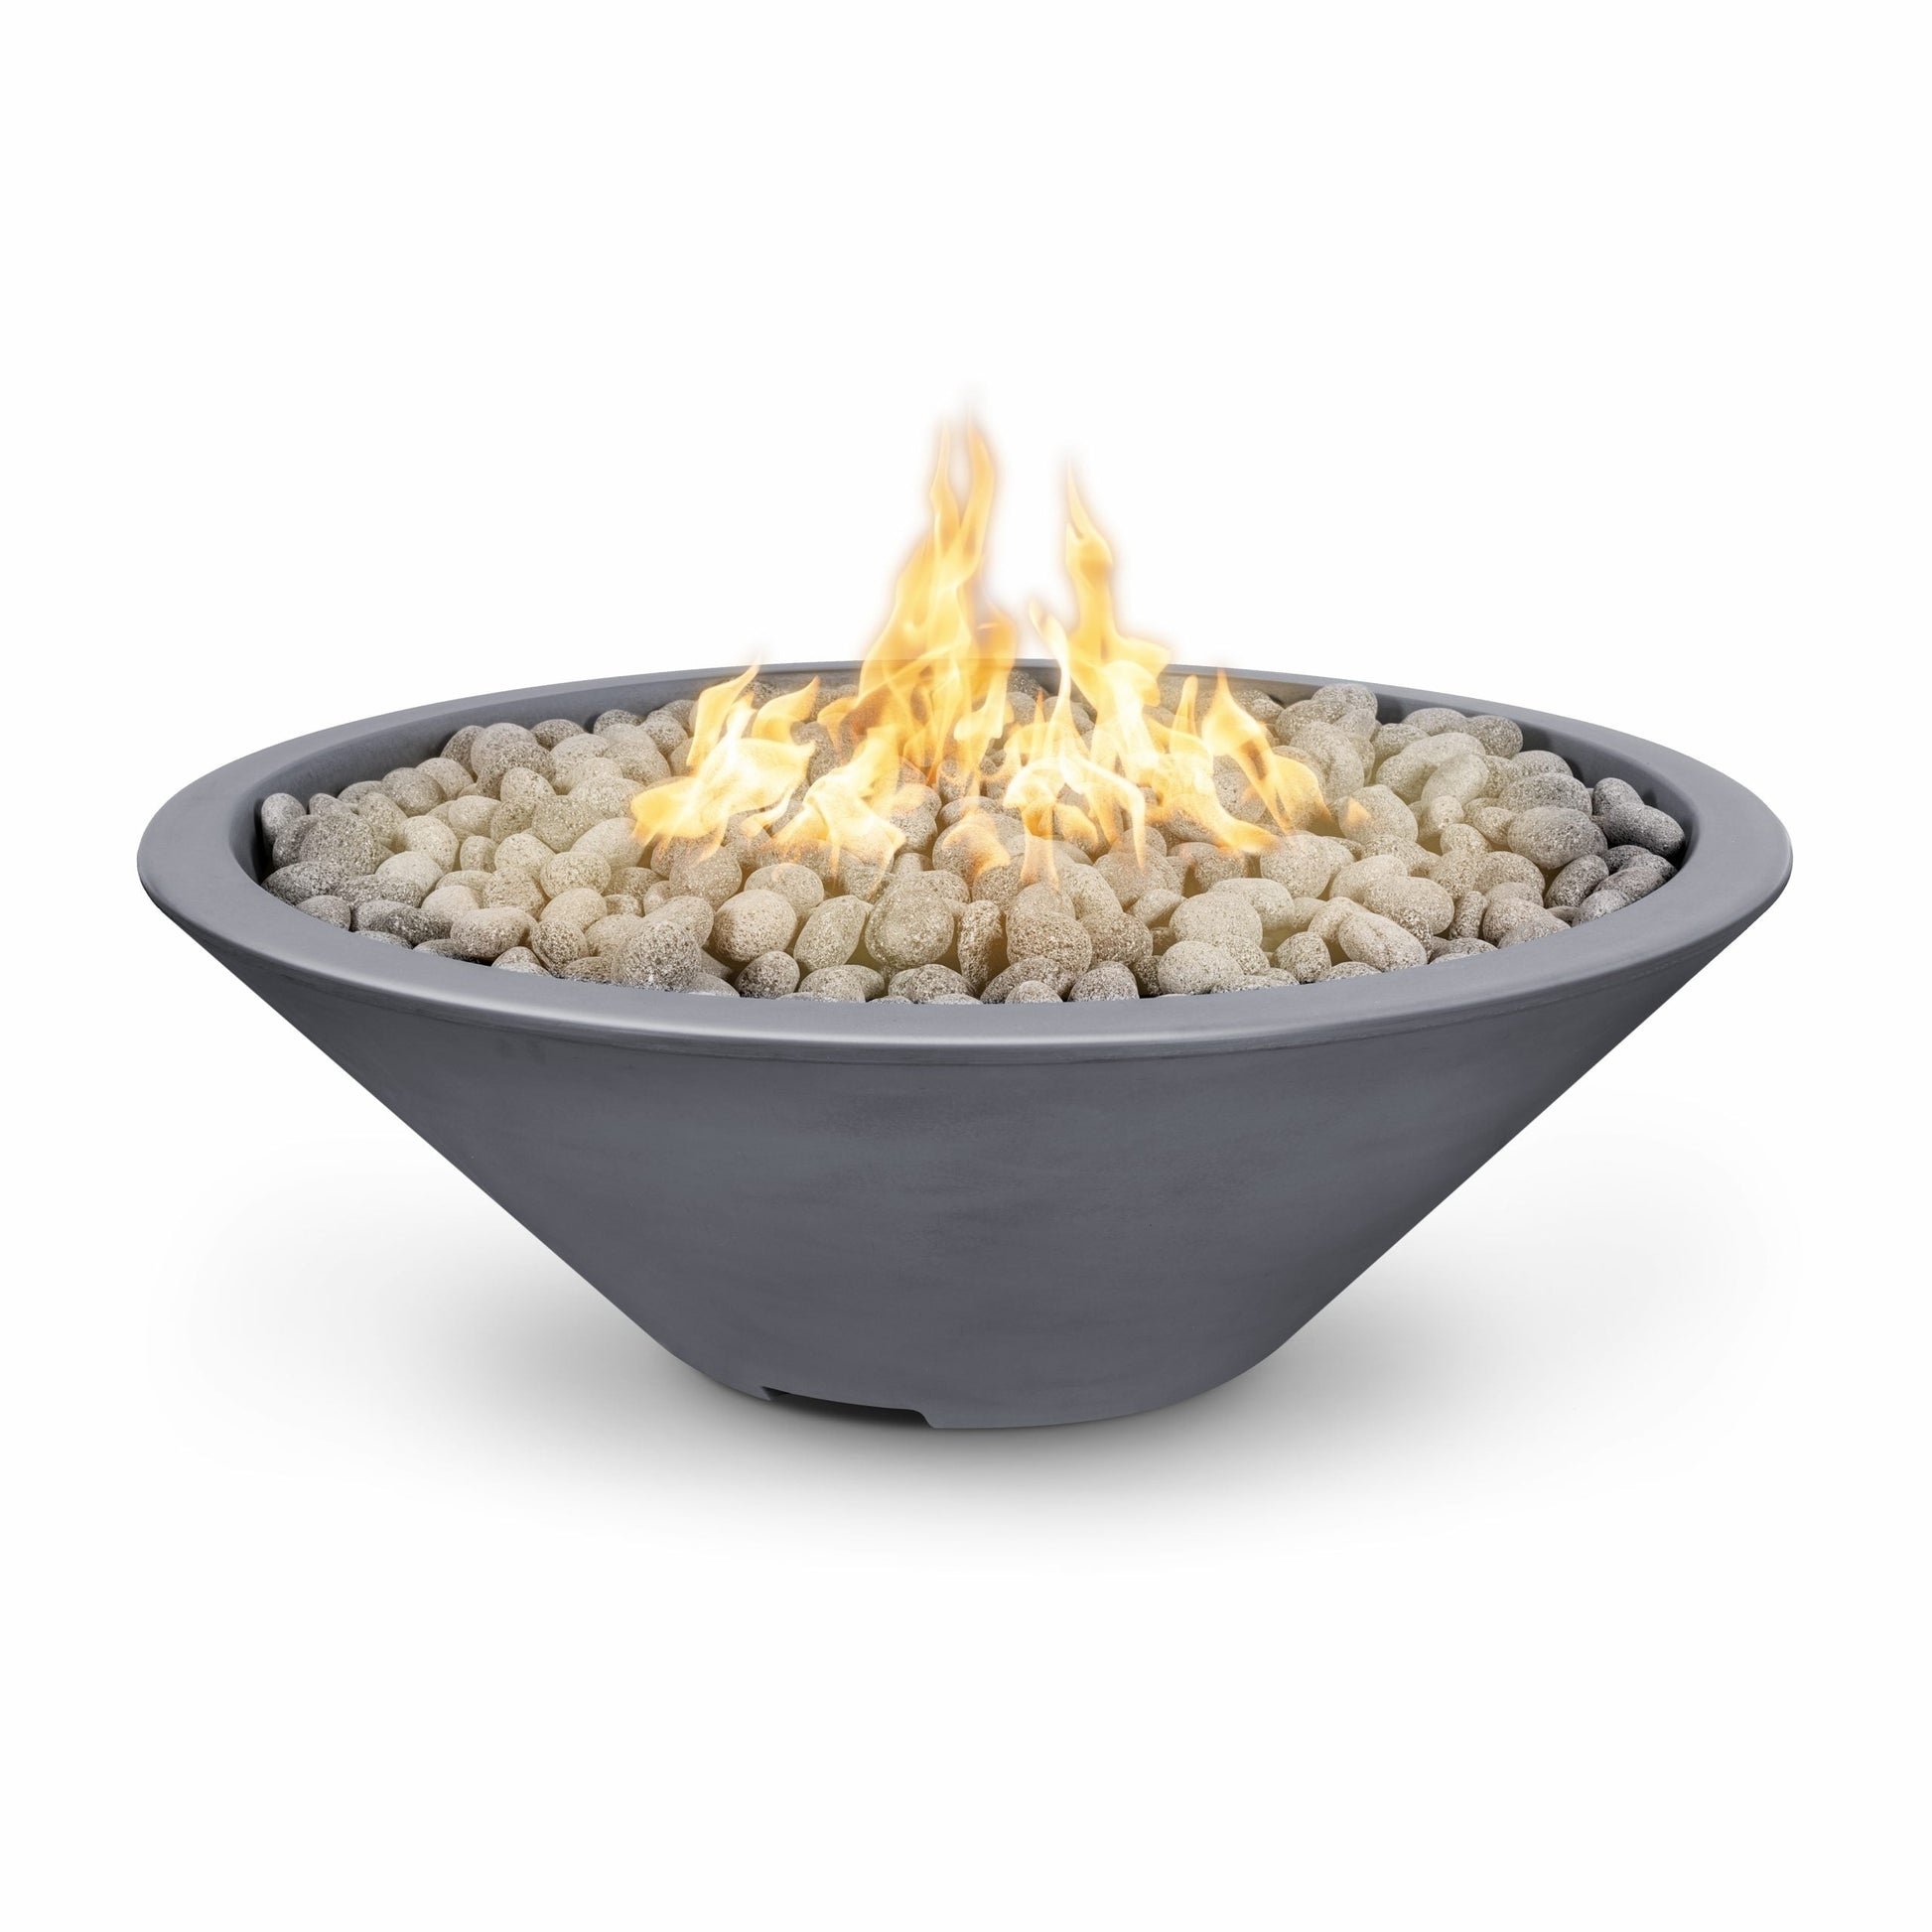 The Outdoor Plus Round Cazo 60" Java Powder Coated Metal Liquid Propane Fire Pit with 12V Electronic Ignition